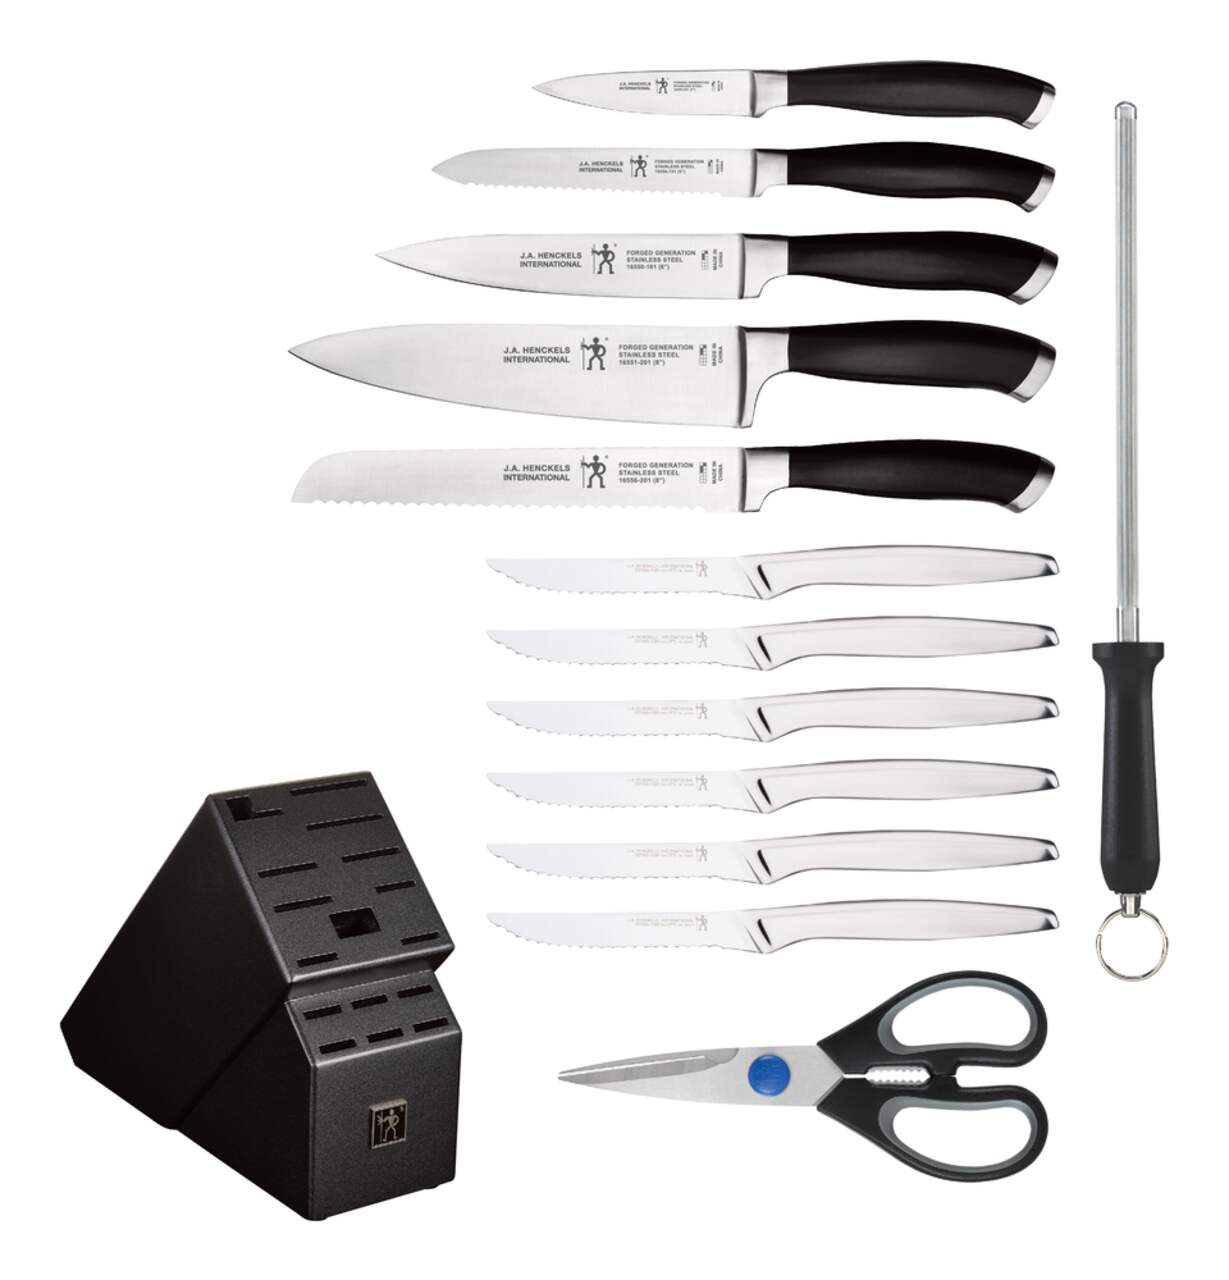 https://media-www.canadiantire.ca/product/living/kitchen/cutlery/0423911/14-piece-henckels-forged-knife-set-c078c73d-9e98-439e-a4fa-d57118a0521f.png?imdensity=1&imwidth=1244&impolicy=mZoom